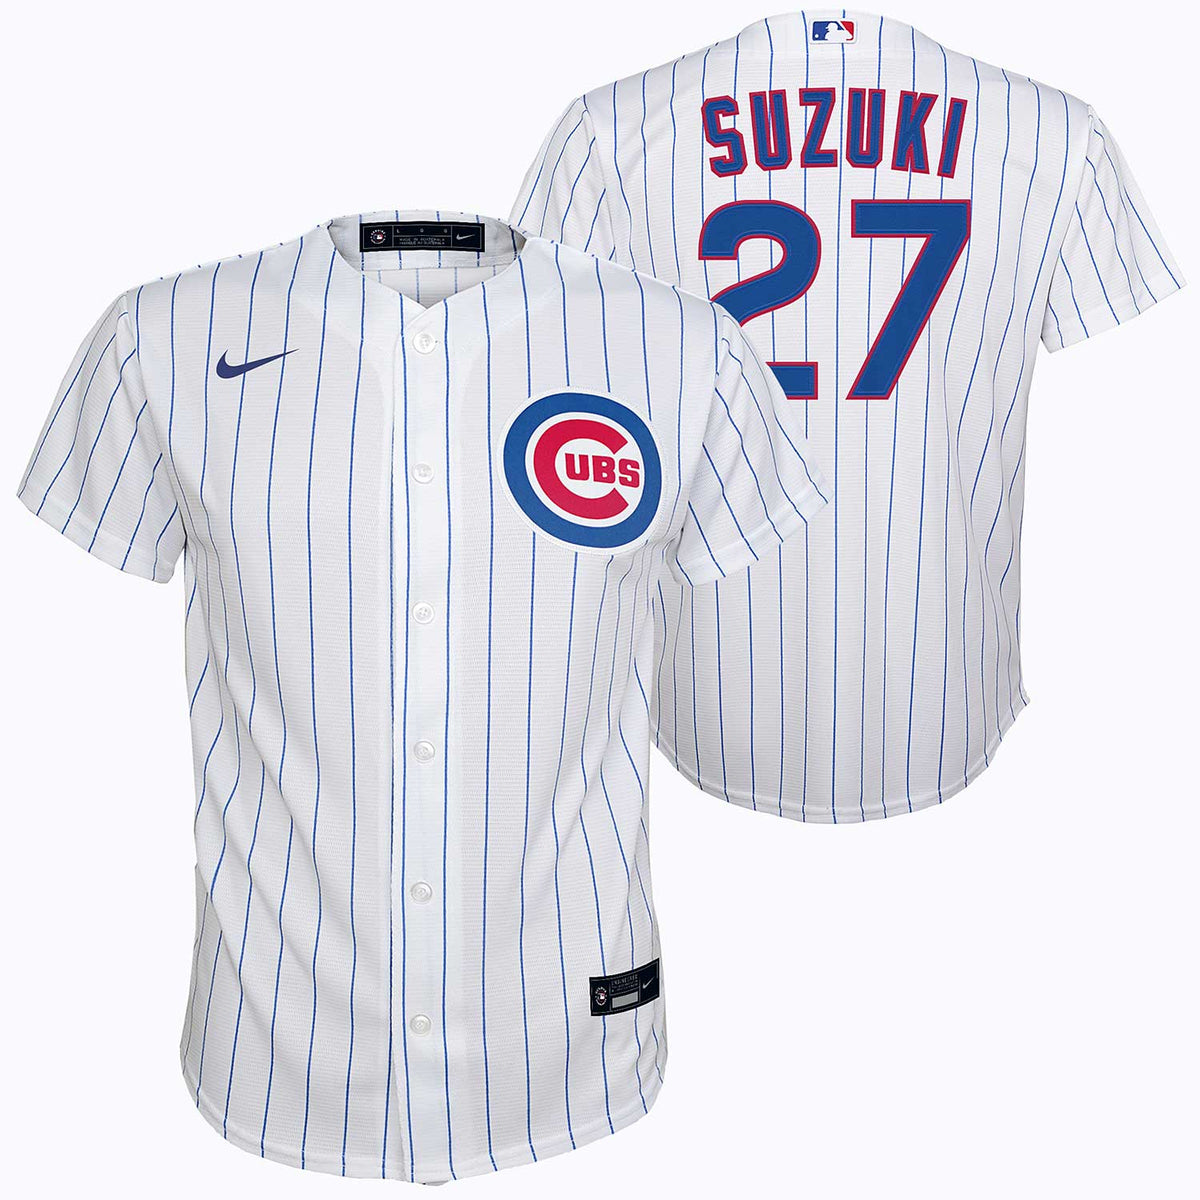 LEE CHICAGO CUBS JERSEY ( SZ YOUTH S 8 ) STITCHED